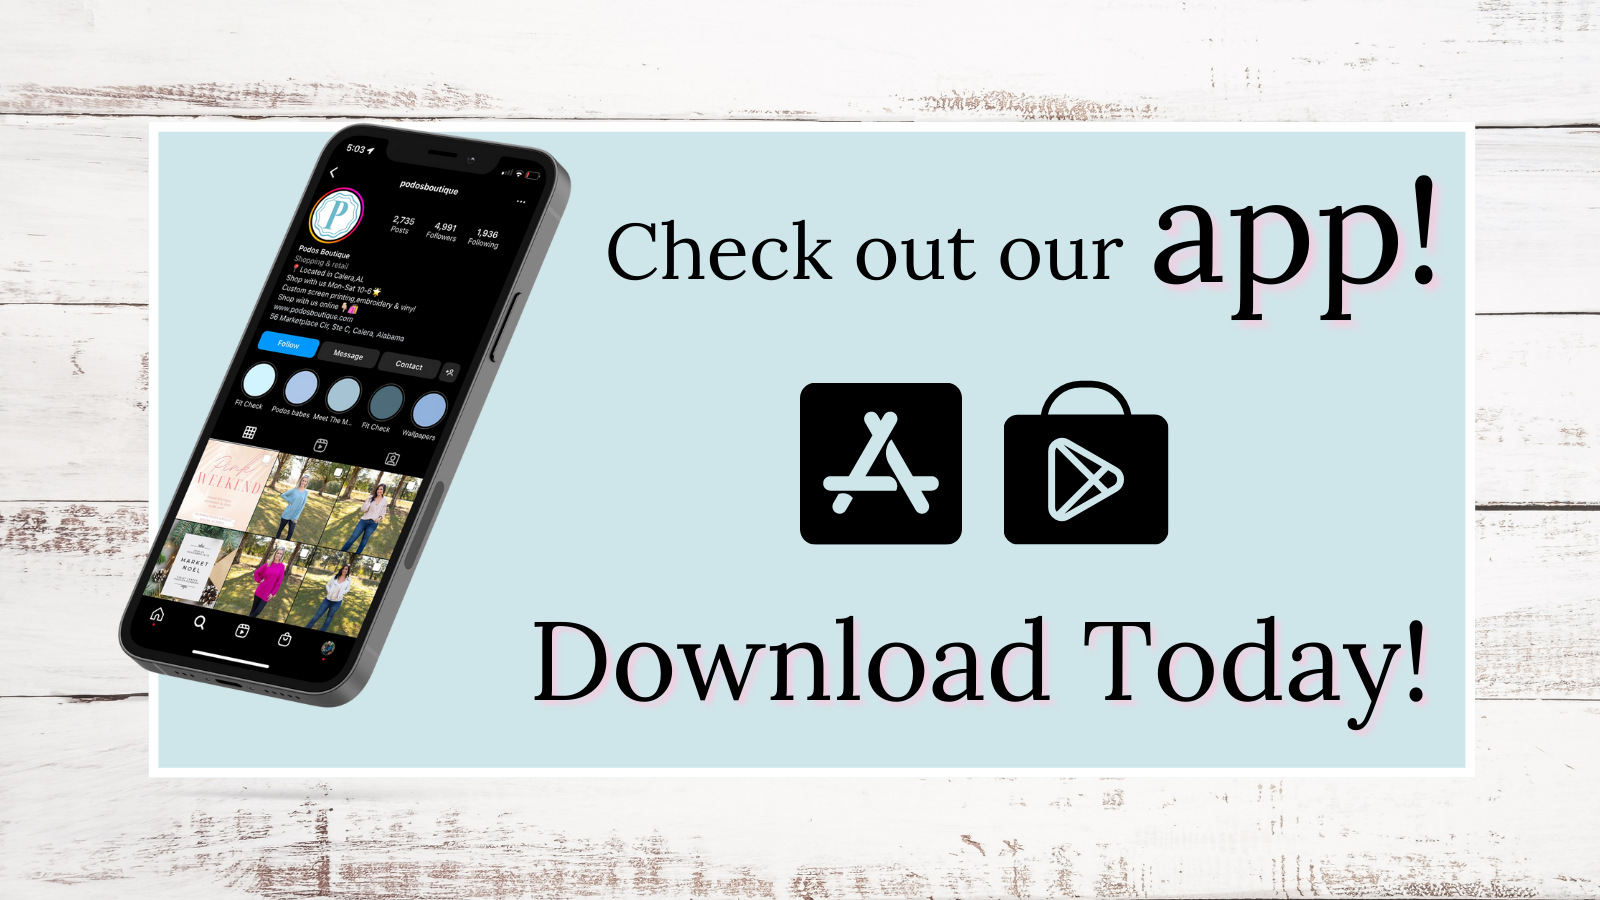 Check out our app! Download today!